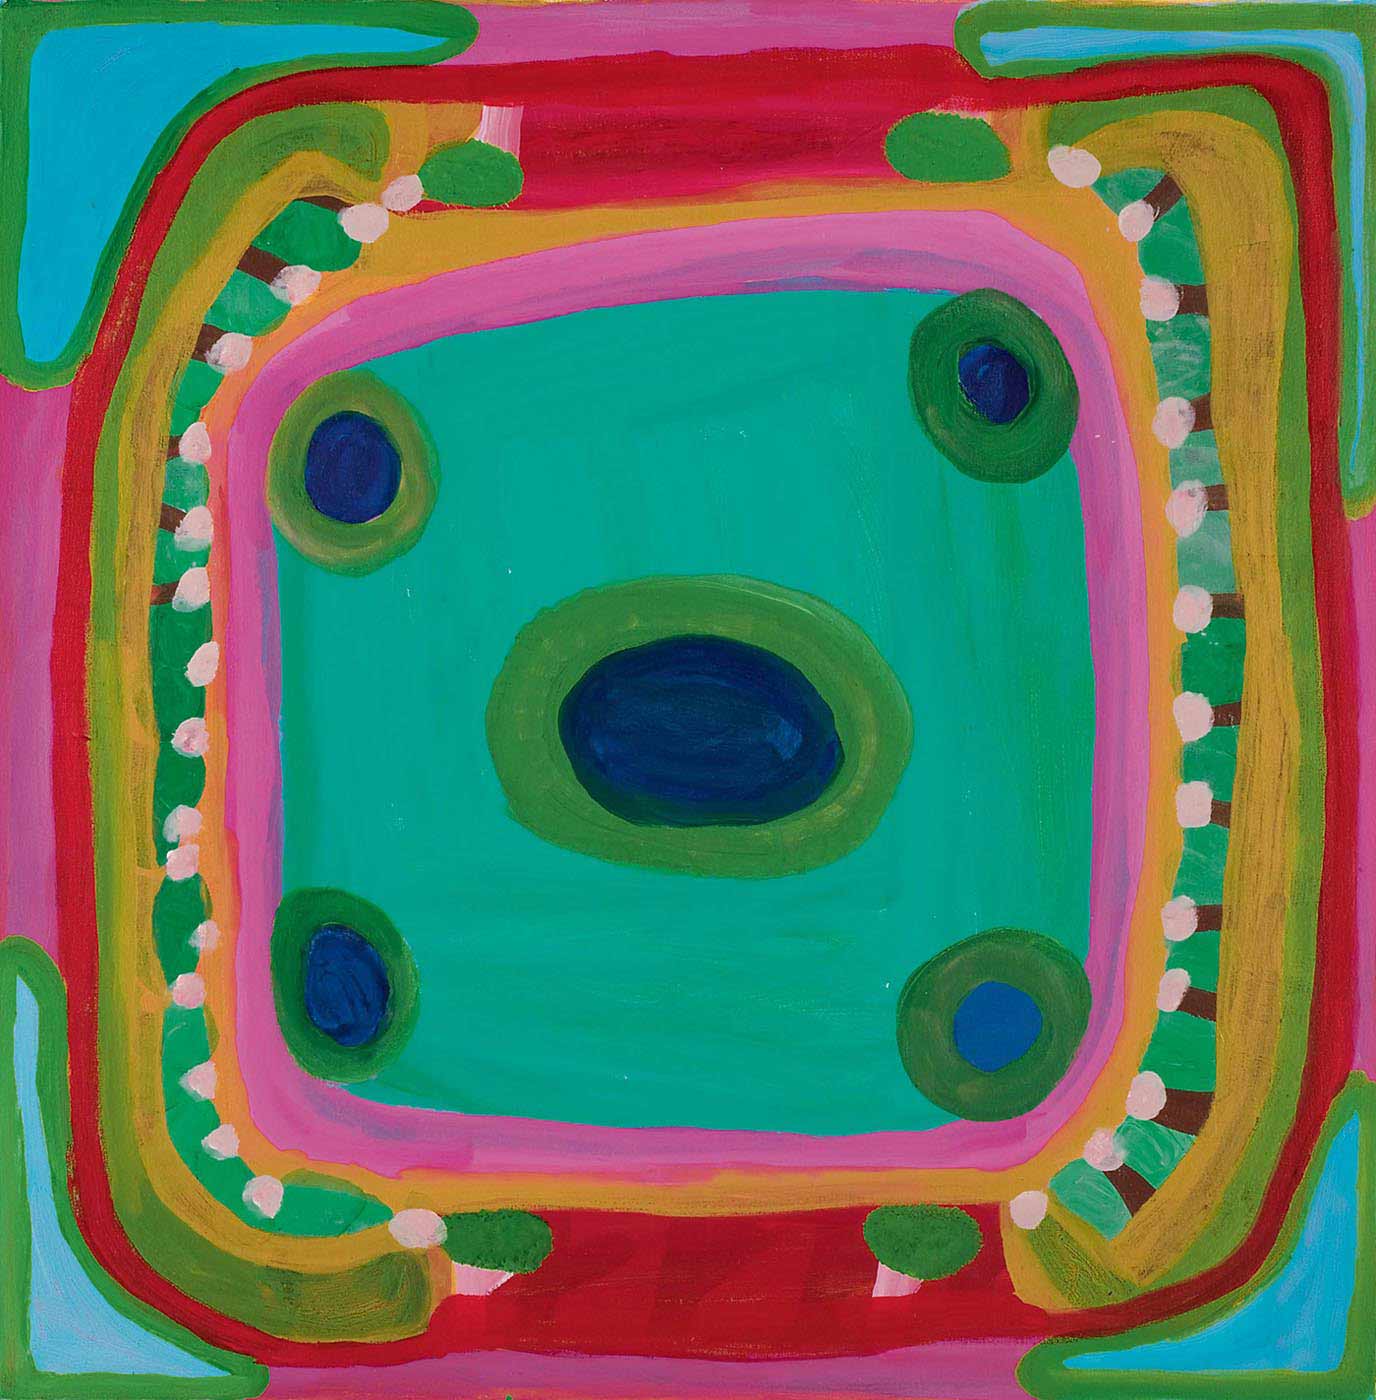 A multicoloured square painting on canvas with a dark blue oval inside a green border in the centre and four dark blue circles with green borders evenly spaced around it, on an aqua background. The centre is surrounded by borders in pink, orange, green, red and pale blue, with a row of brown and pink motifs running down both sides. The corners have a roughly triangular shape in light blue with a lime green border. - click to view larger image